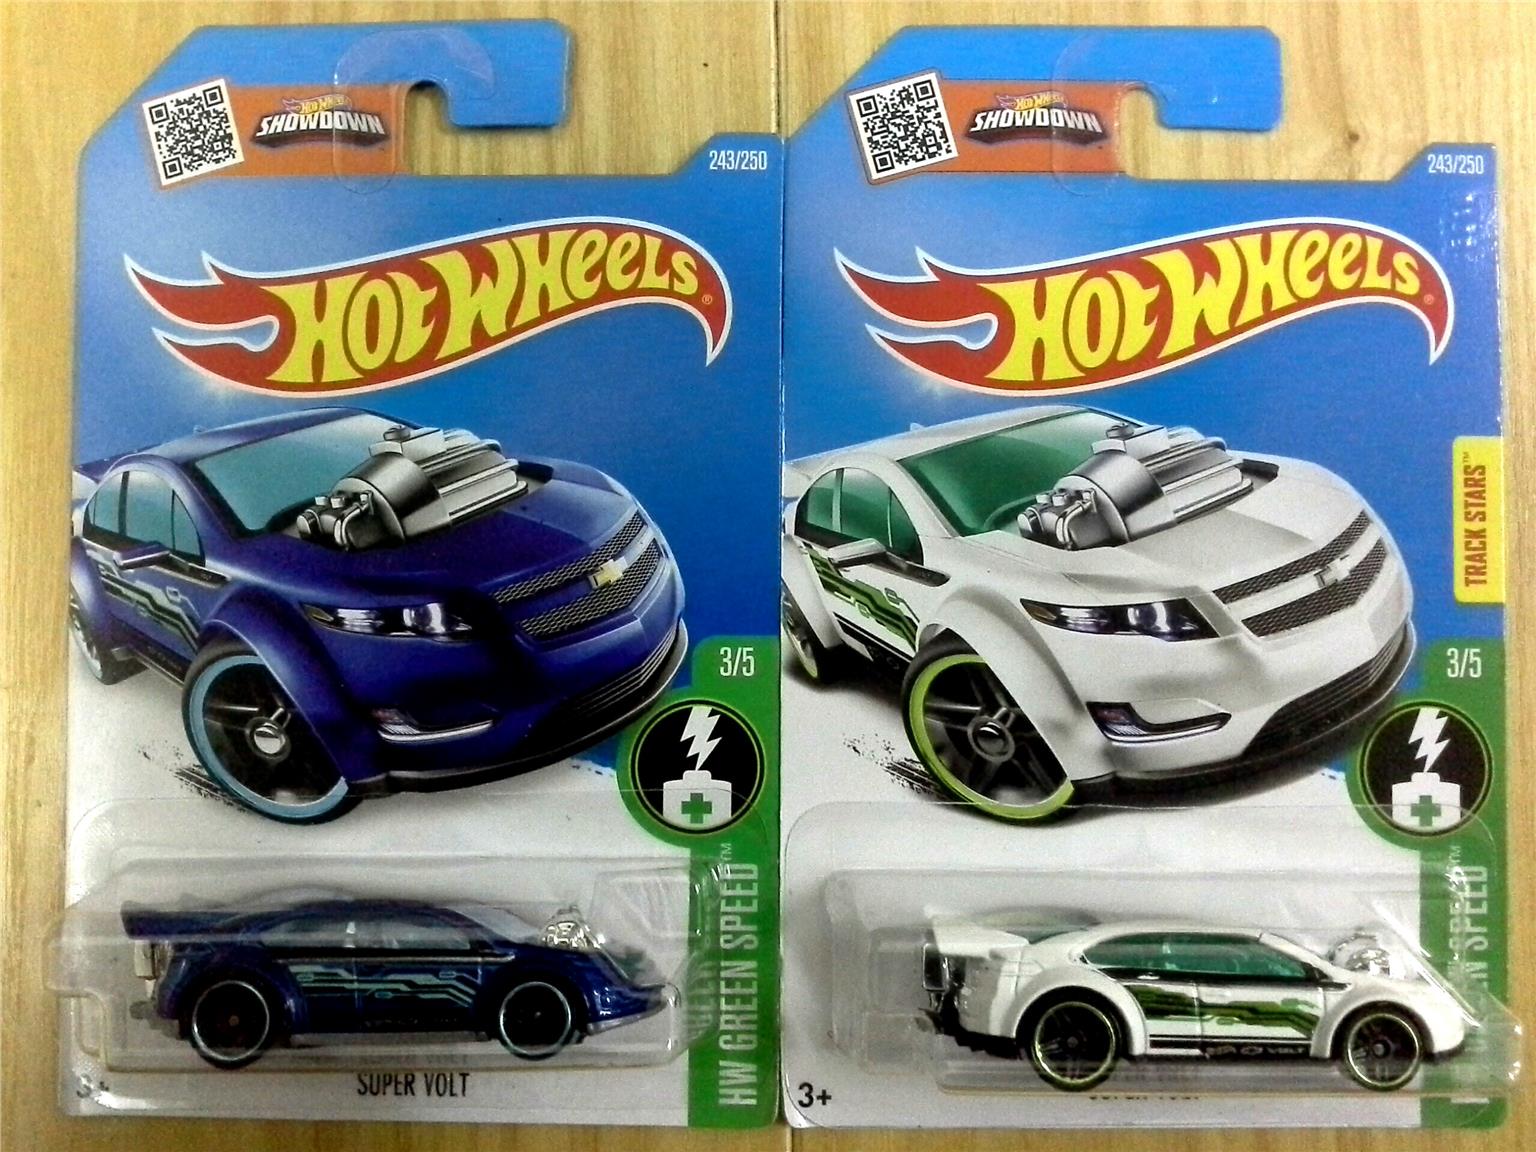 Hot Wheels Multi Pack Exclusive Super Volt green,Year issue: 2018,Super Vol...